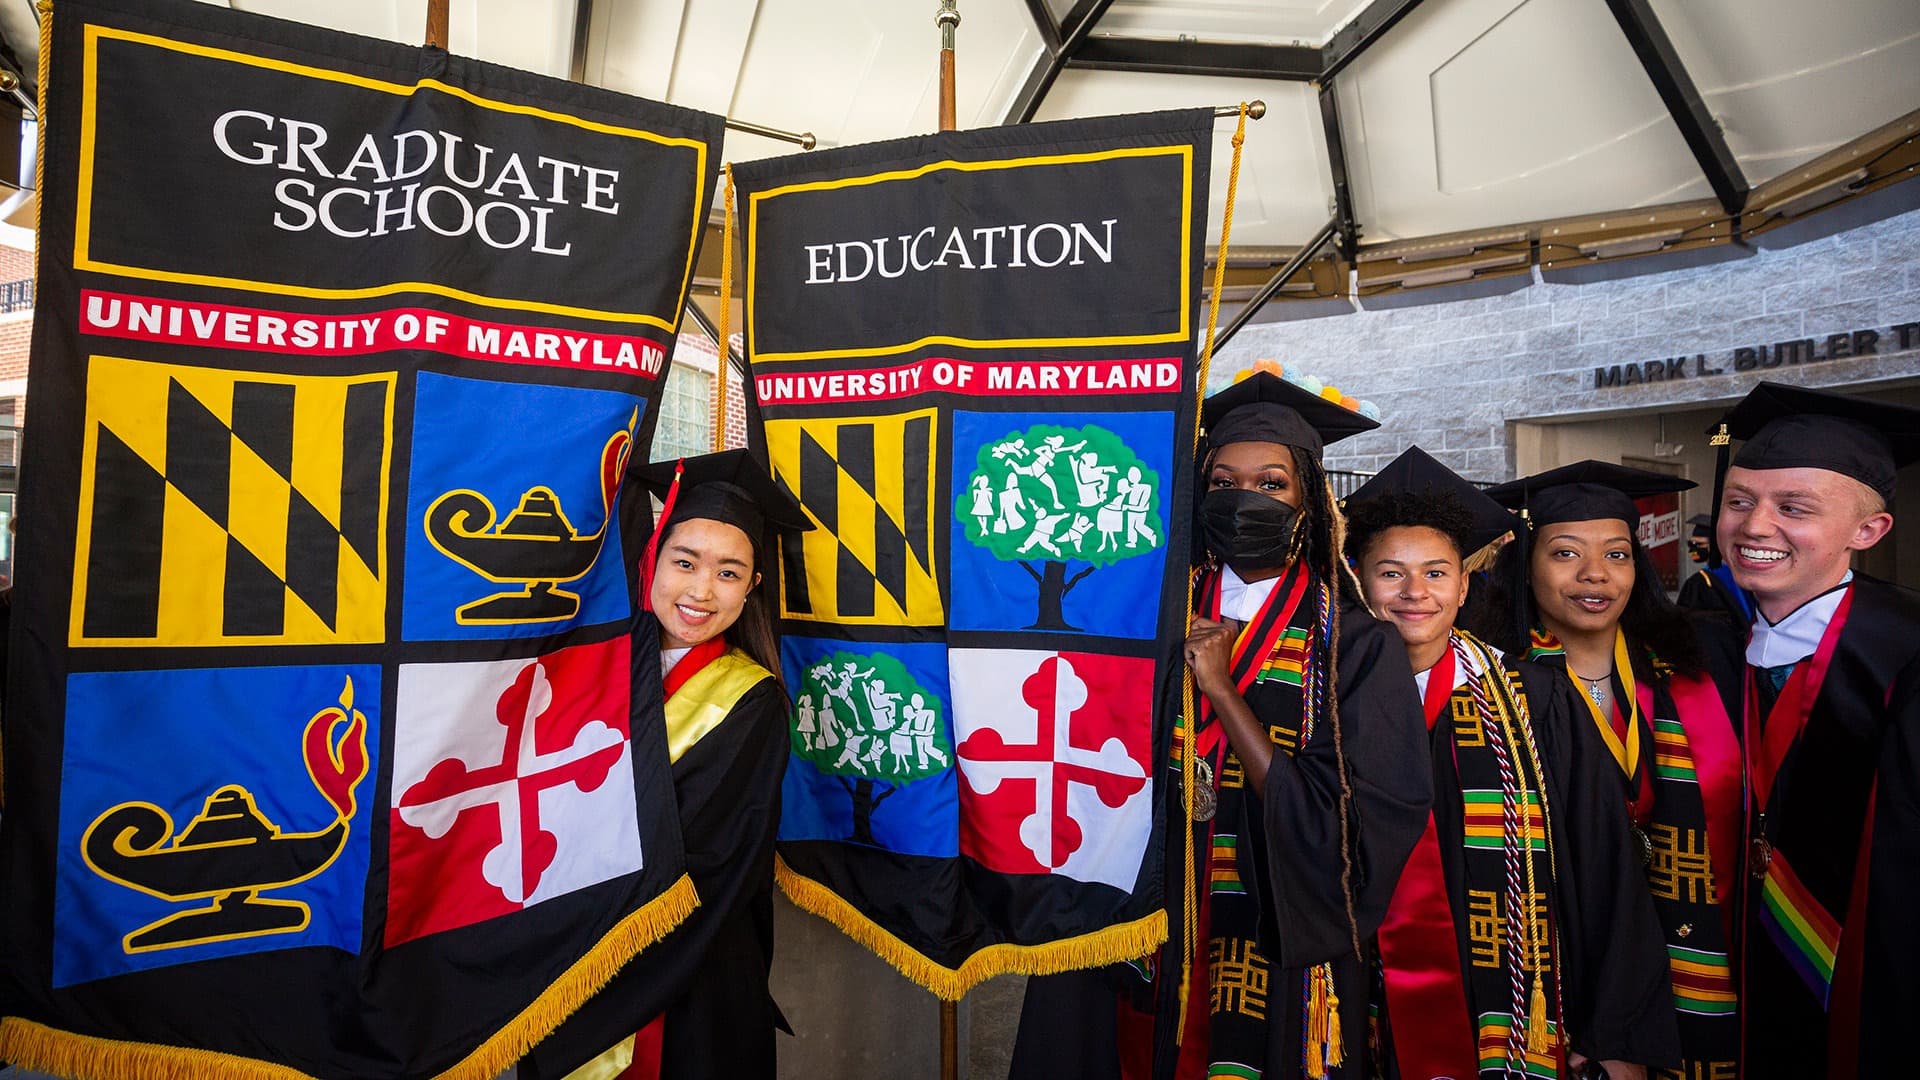 Senior marshals line up and hold gonfalons for the graduate school and college of education at commencement May 2021